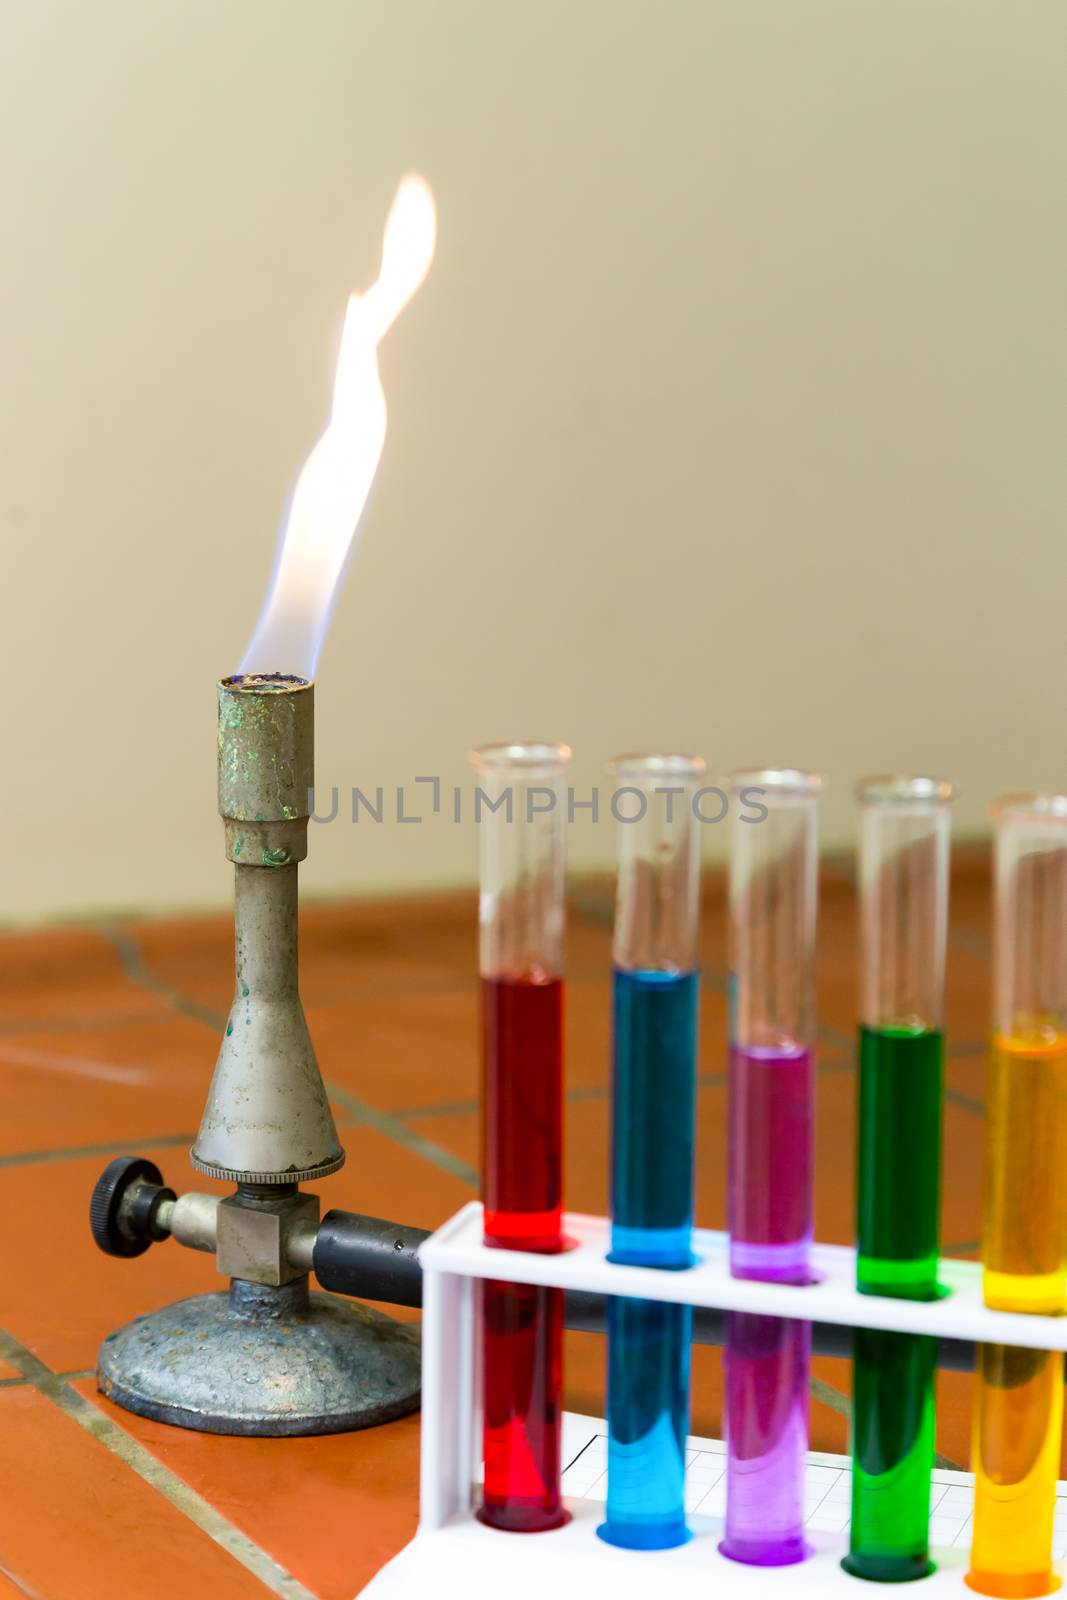 Gas burner with colored test tubes by BenSchonewille